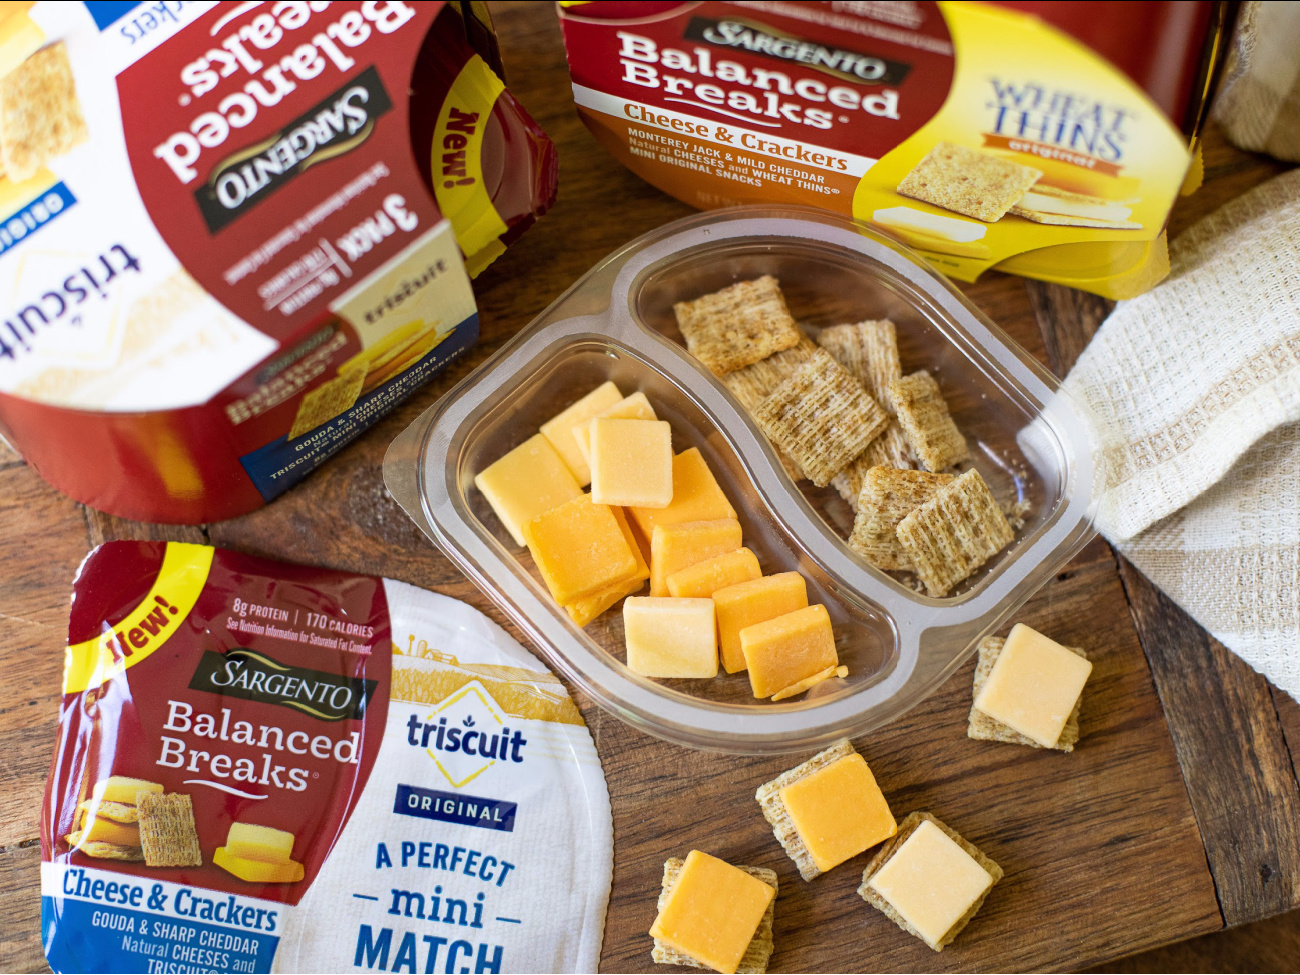 Sargento Balanced Breaks Cheese & Crackers 3-Packs Just $2.99 At Kroger